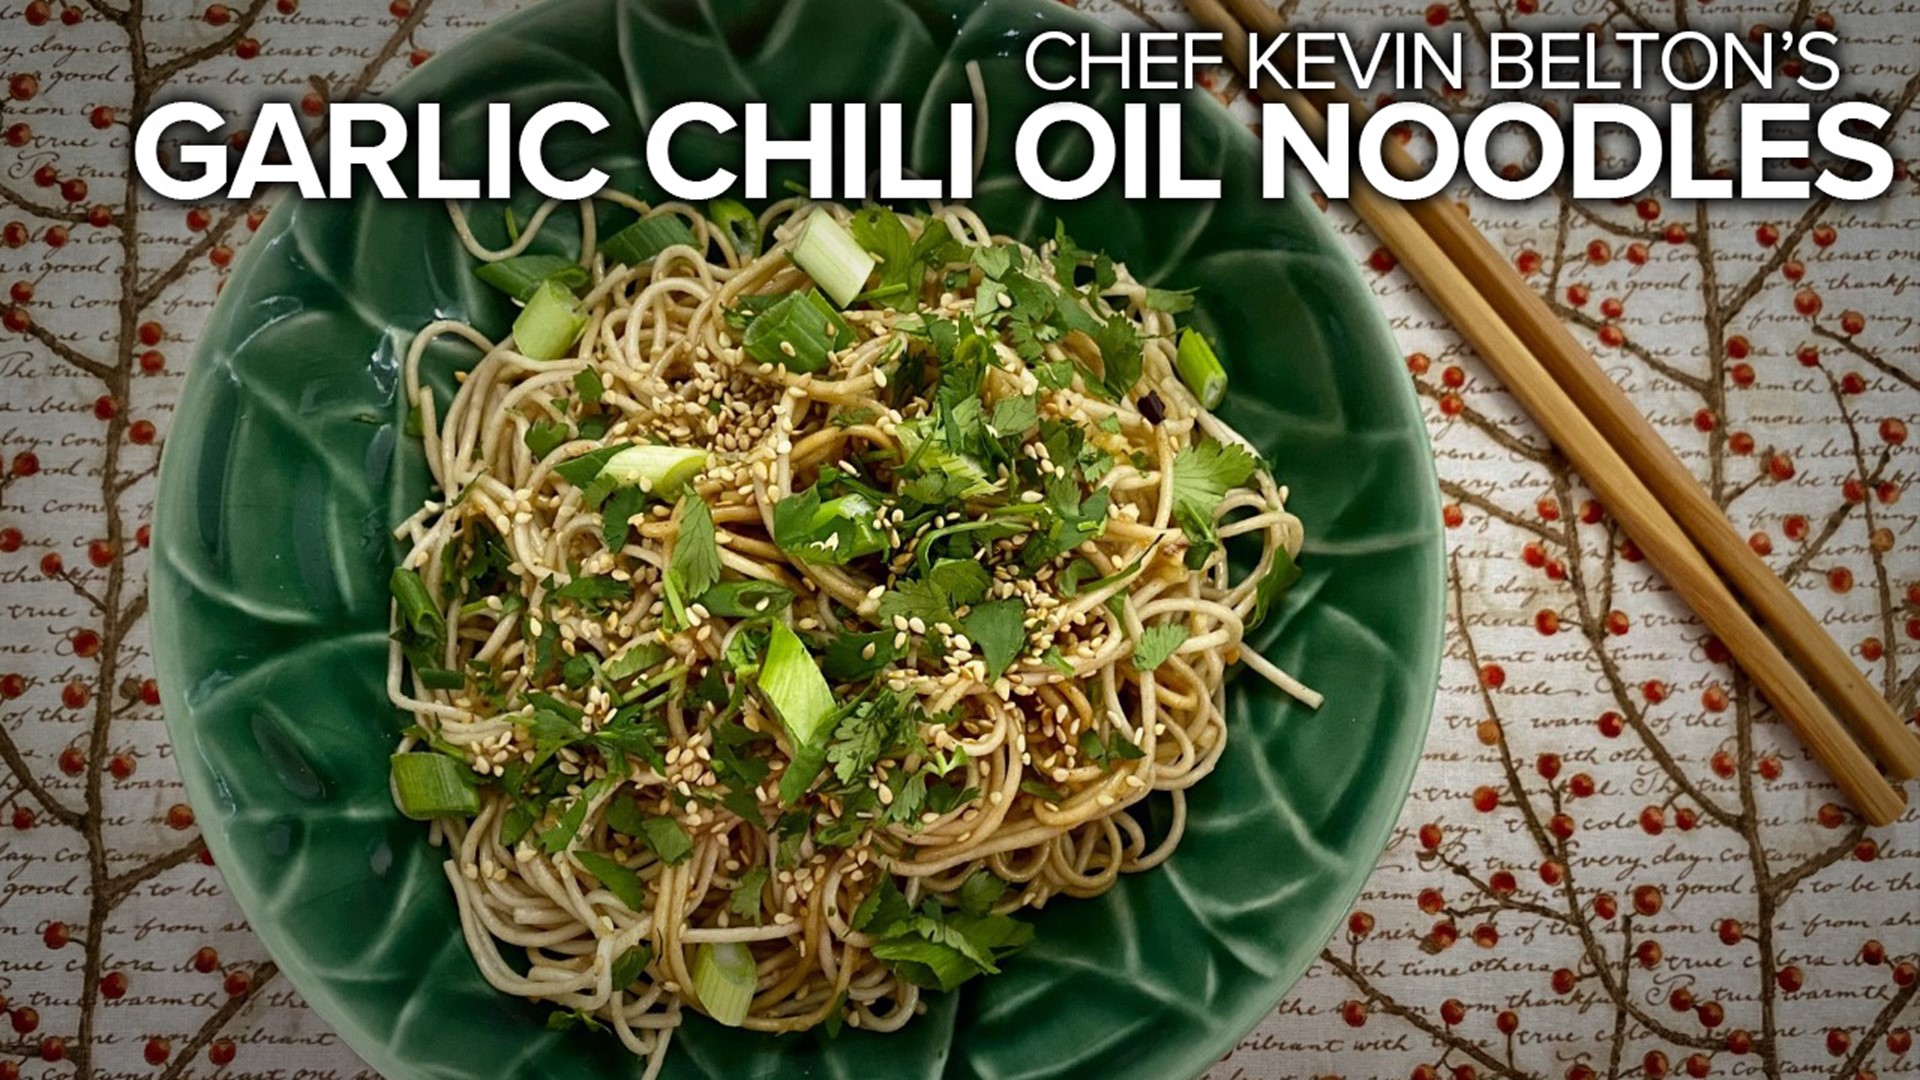 It's National Noodle Month! So, let's try something a little different with these garlic chili oil noodles.